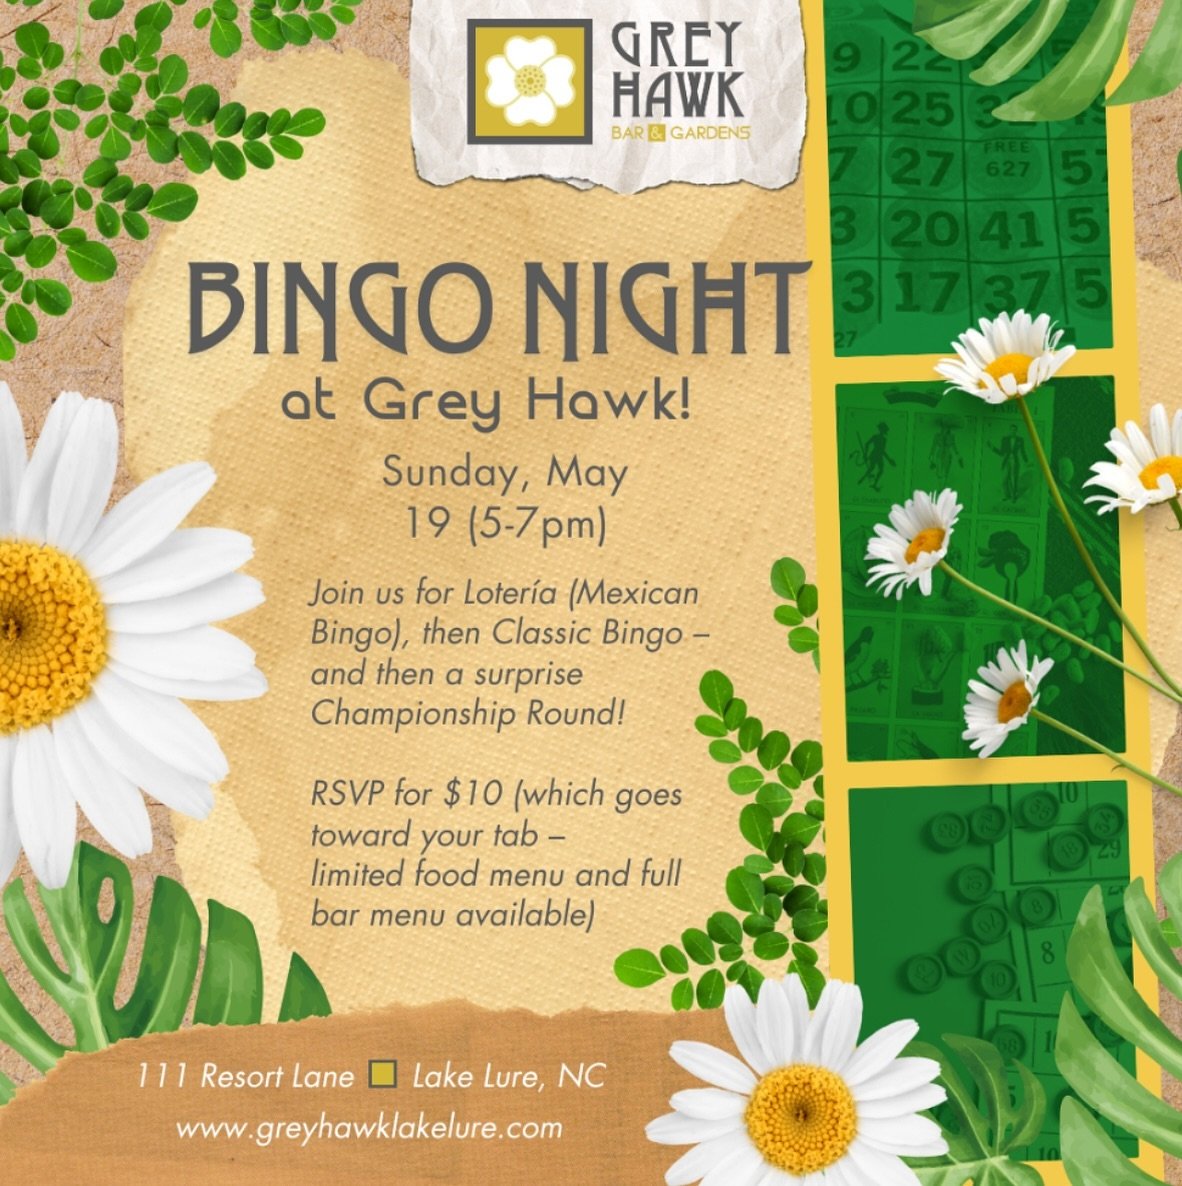 🎰🍺🍷 You know what cures the Rainy Weekend blues? BINGO! 

We have had such a blast the last two BINGO nights and would love to see you this Sunday, May 19 at 5pm for a BINGO extravaganza - two rounds of Loter&iacute;a, then six rounds of regular B